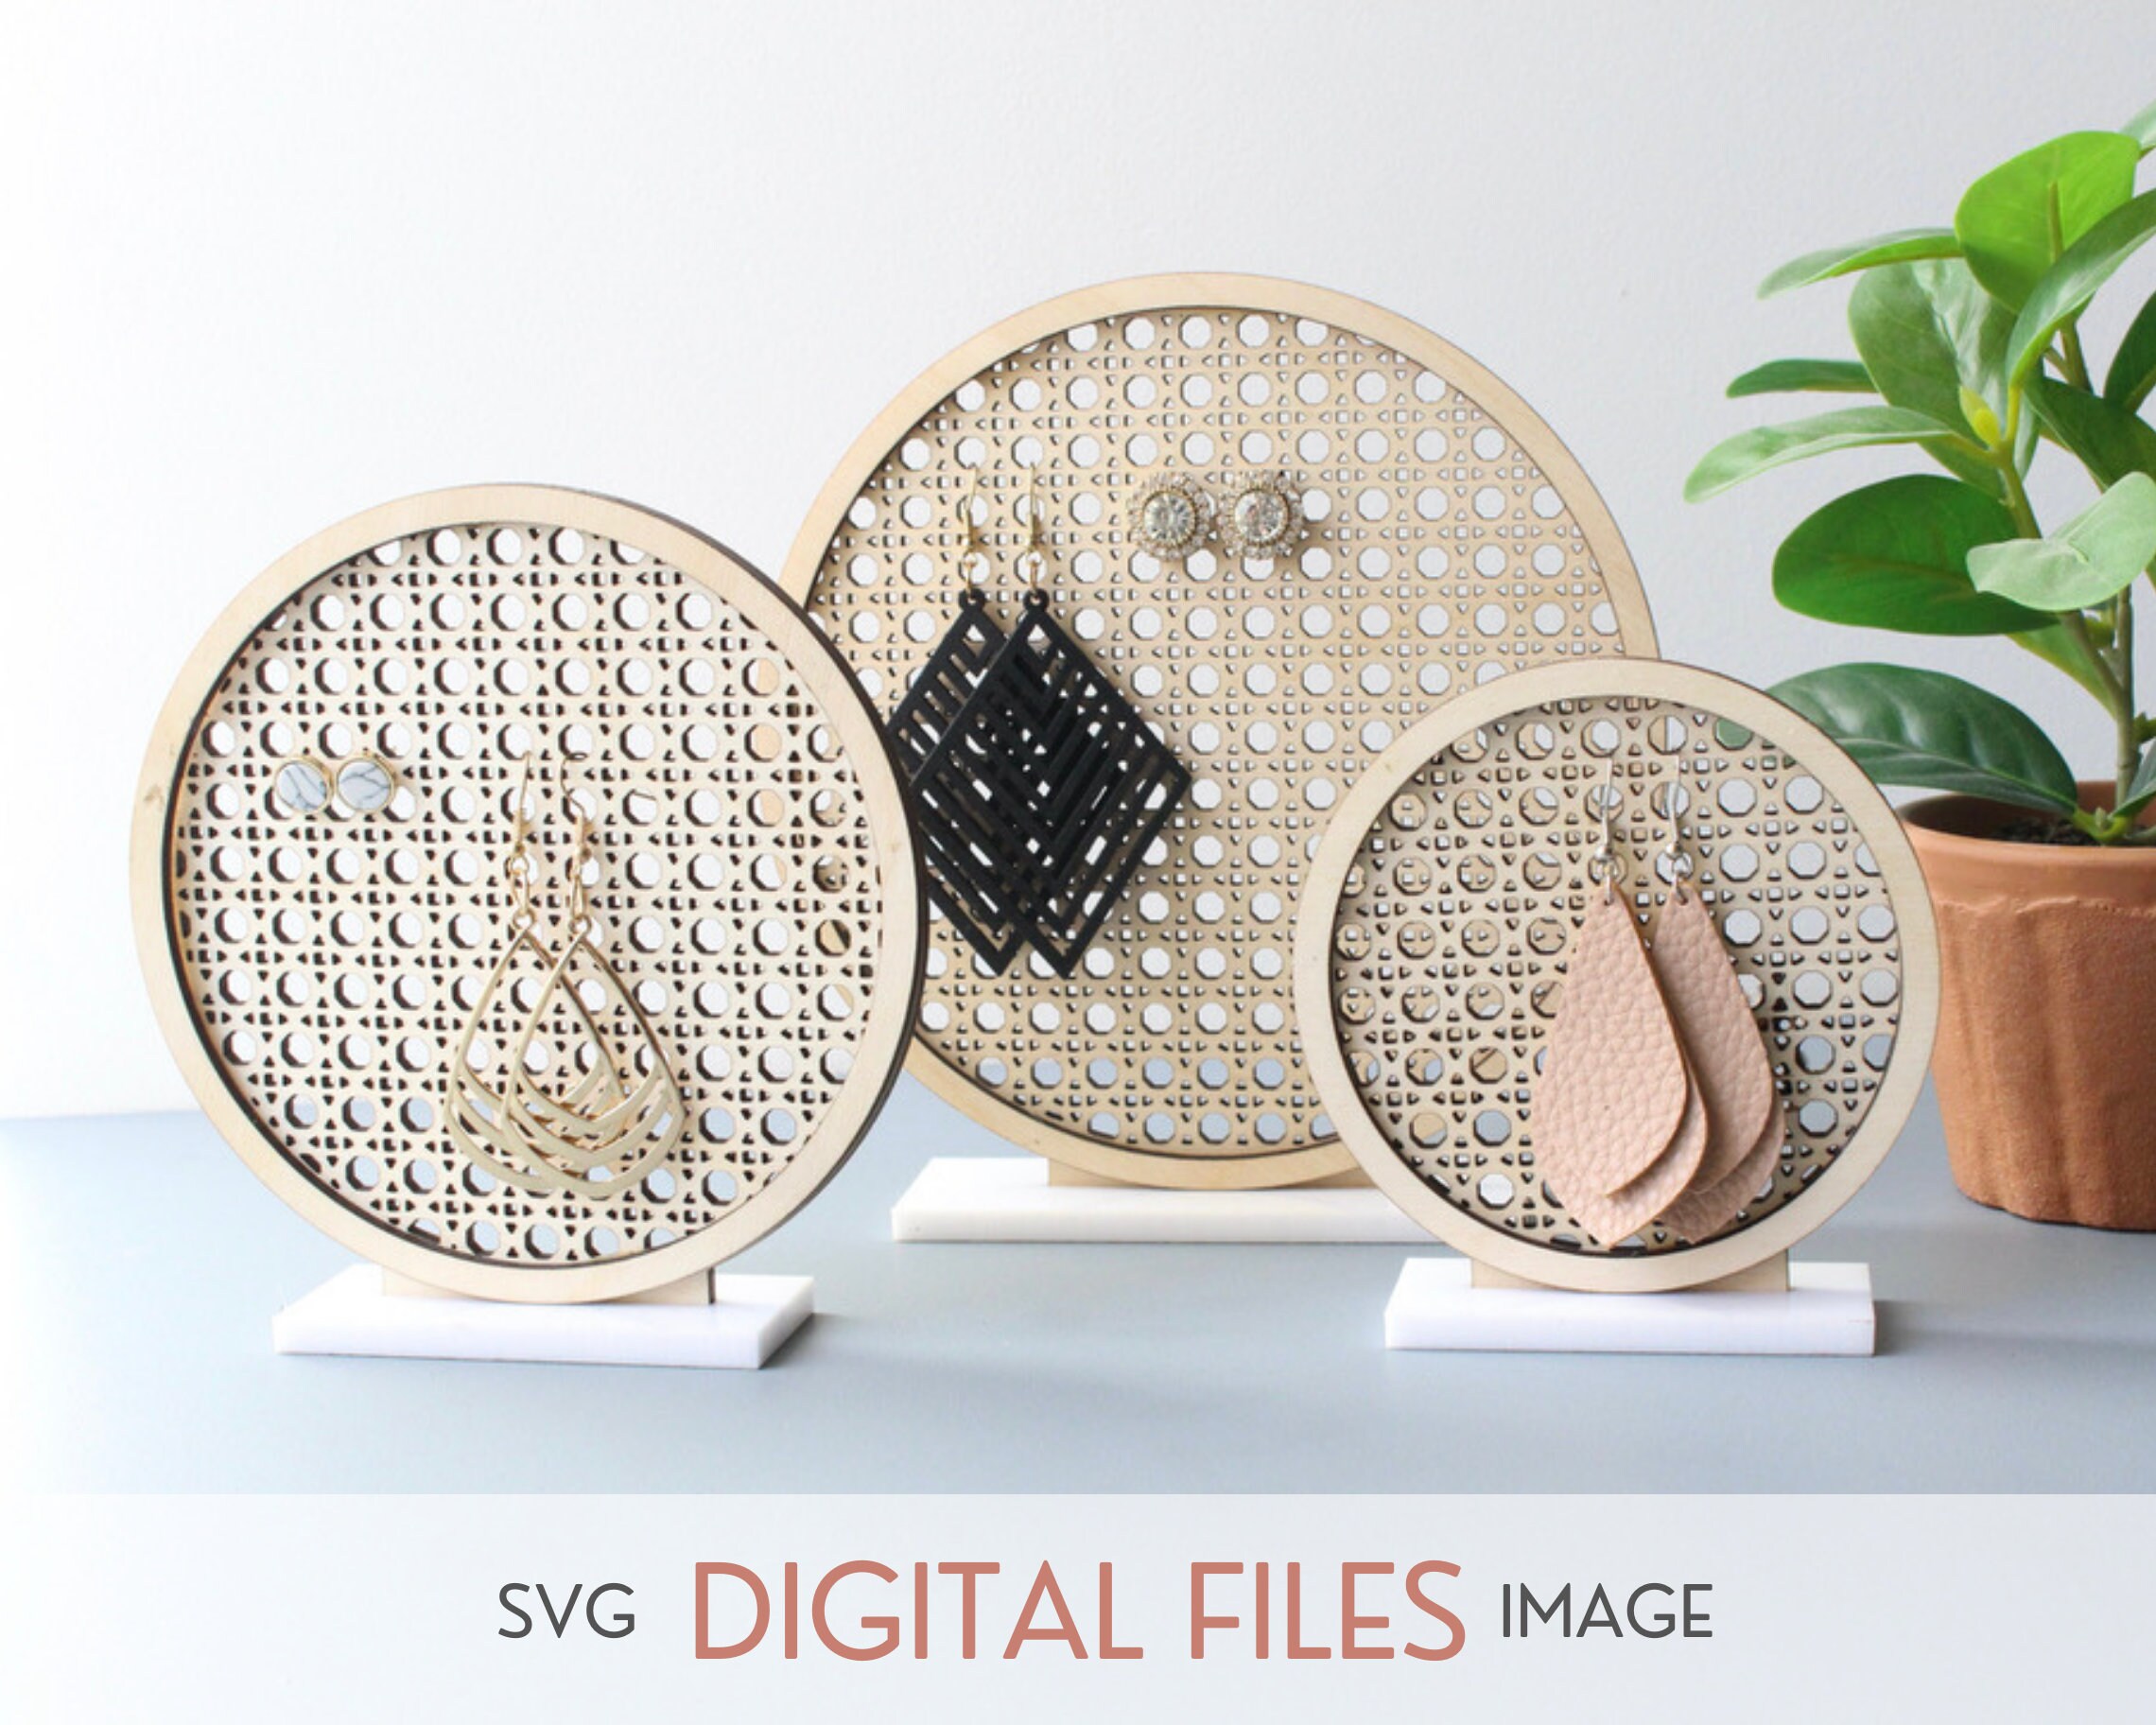 SVG Rattan Travel Earring Holders Set of 4 Laser Cut Files for Glowforge,  Stud Earring Holder Minimalist Jewelry Display Stands for Earrings 